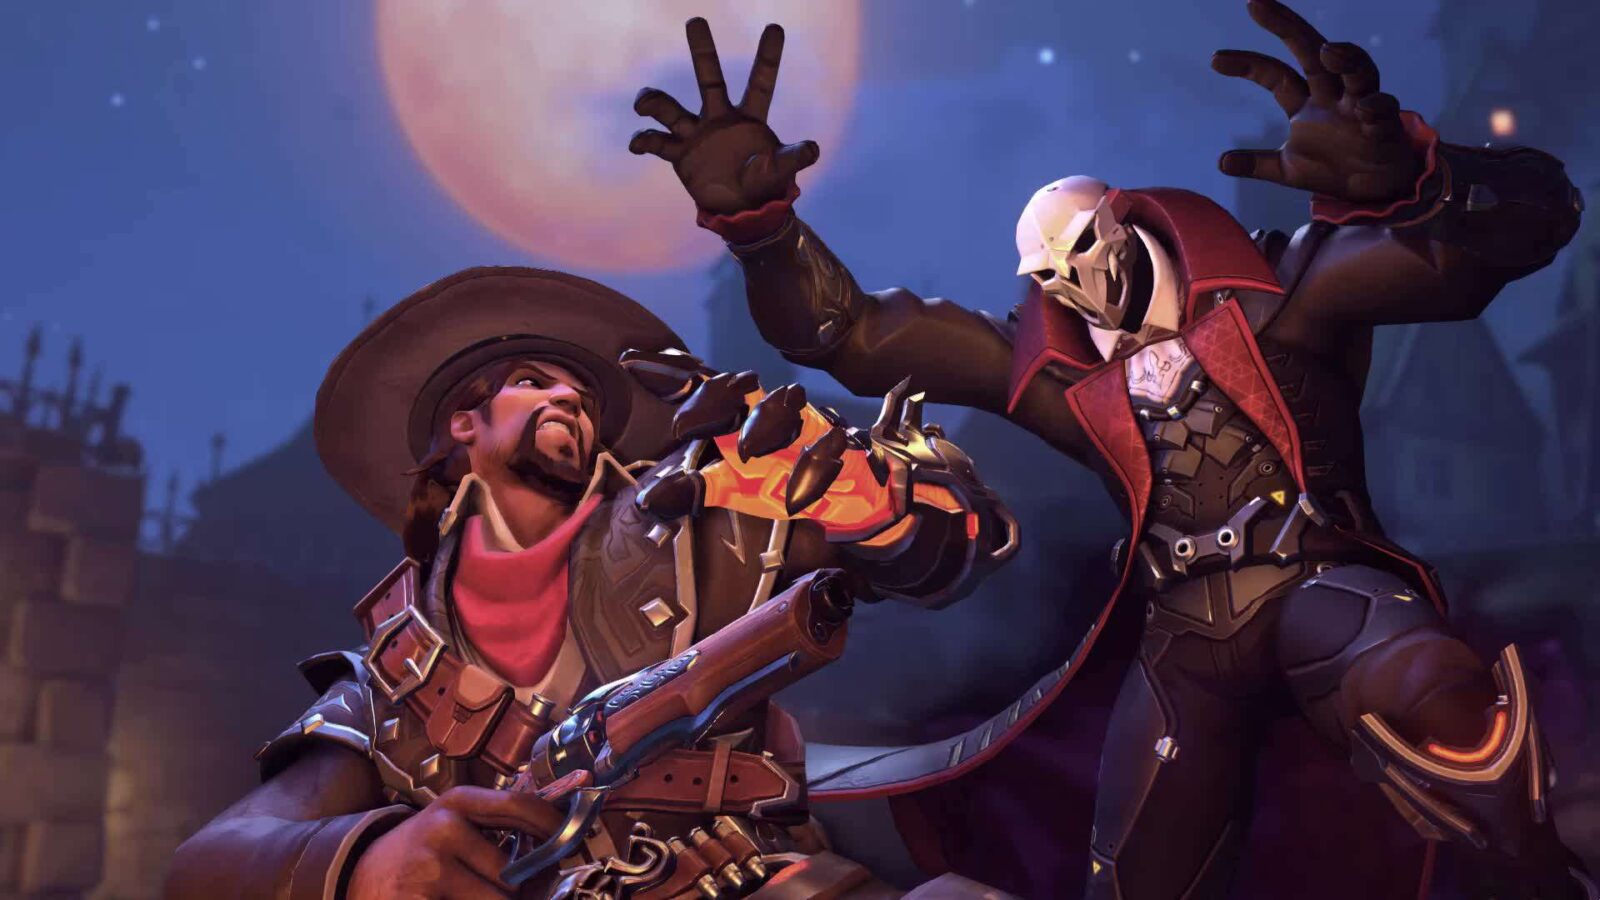 LiveWallpapers4Free.com | Reaper and Mcree Halloween Terror Overwatch - Free Live Wallpaper